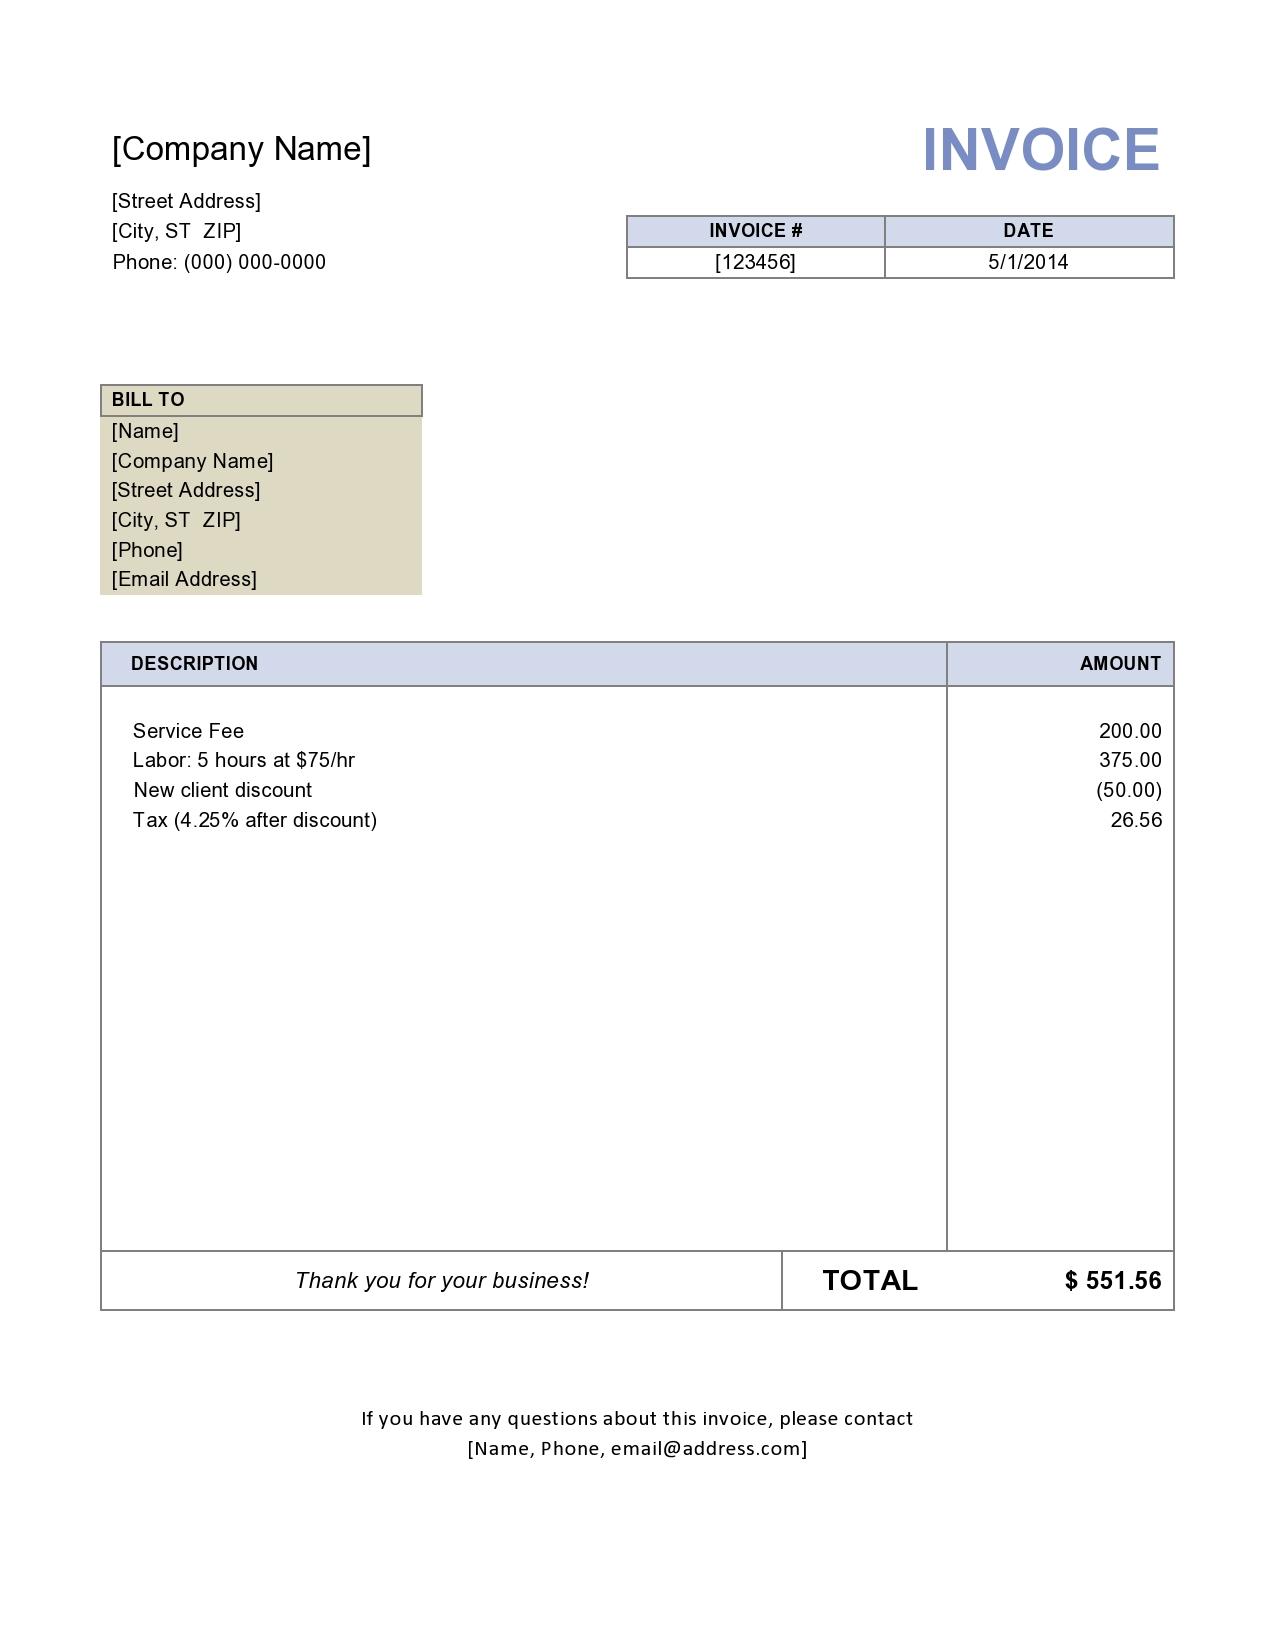 Invoice Template Free  Small Business Invoice Template In Invoice Template Word 2010